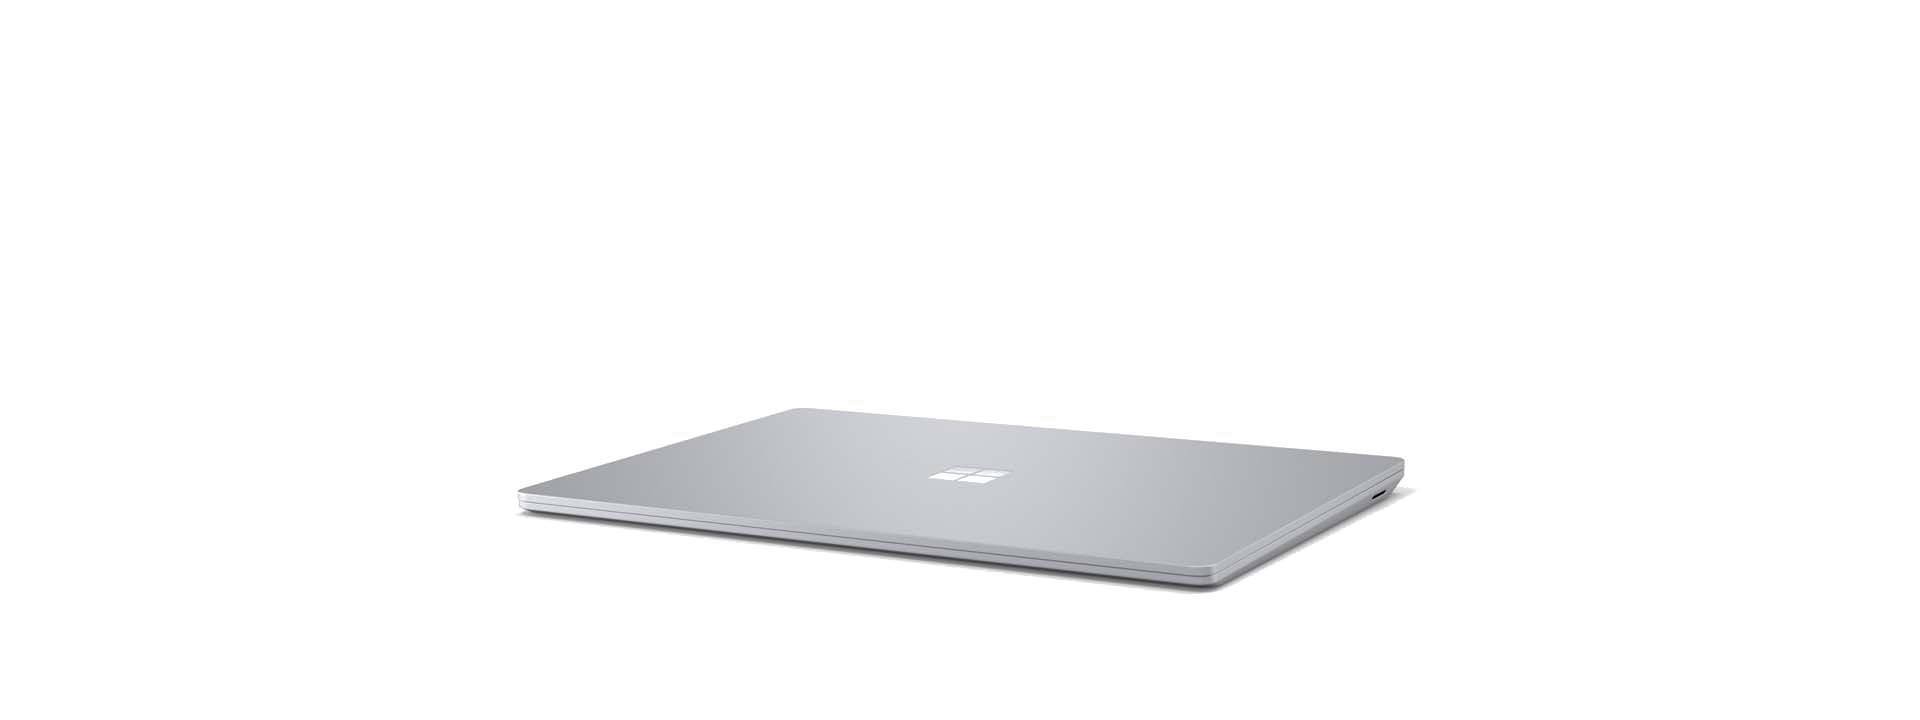 Surface Laptop 3 at an angle with screen closed